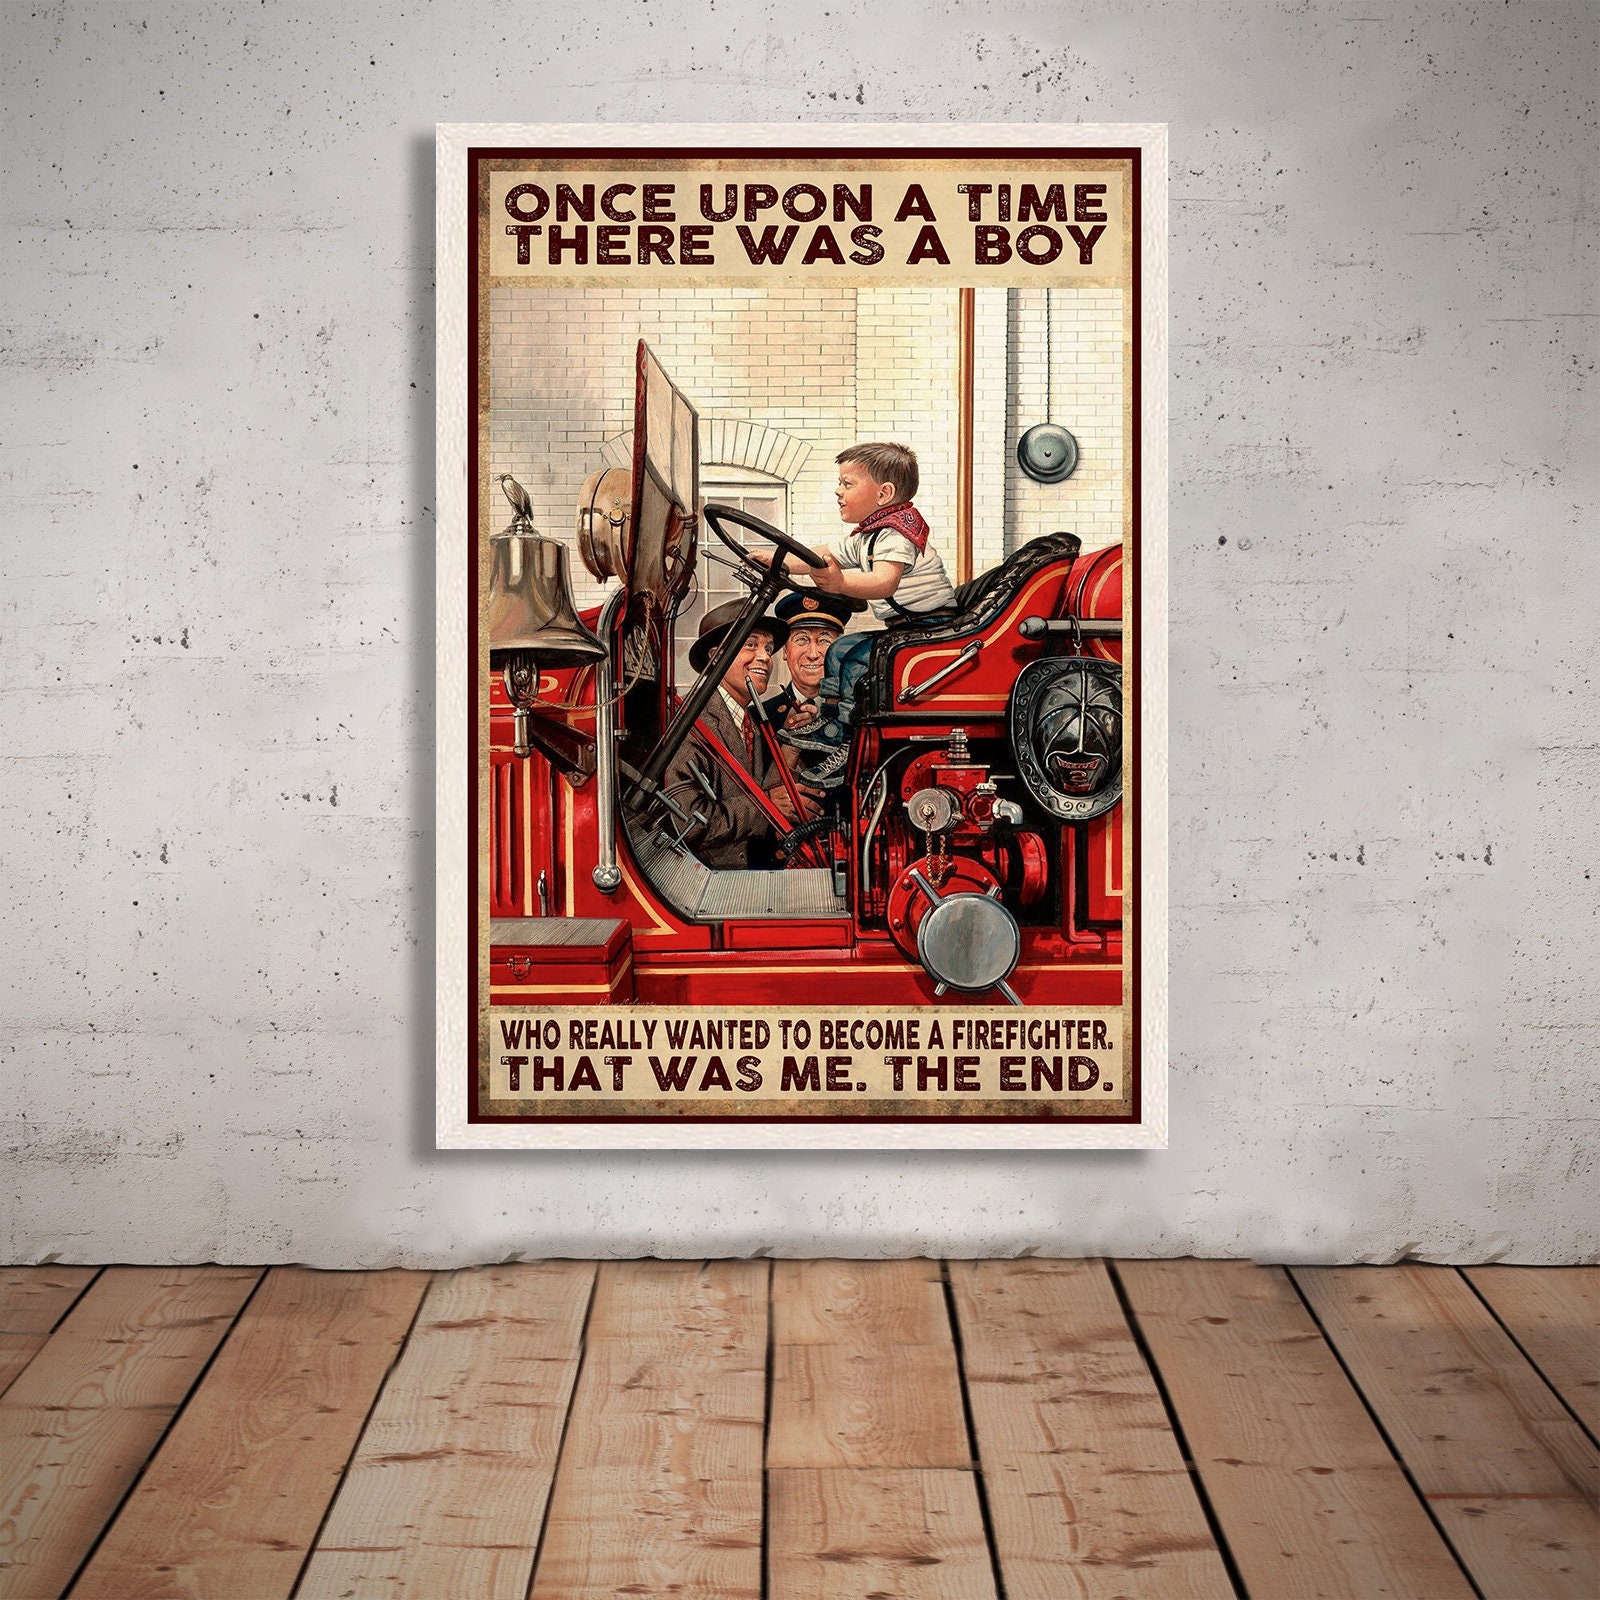 Discover Firefighter Once Upon a Time There Was a Boy Poster, Bathroom Wall Decor, Bathroom Wall Decor, Funny Firefighter Poster, Wall Art Home